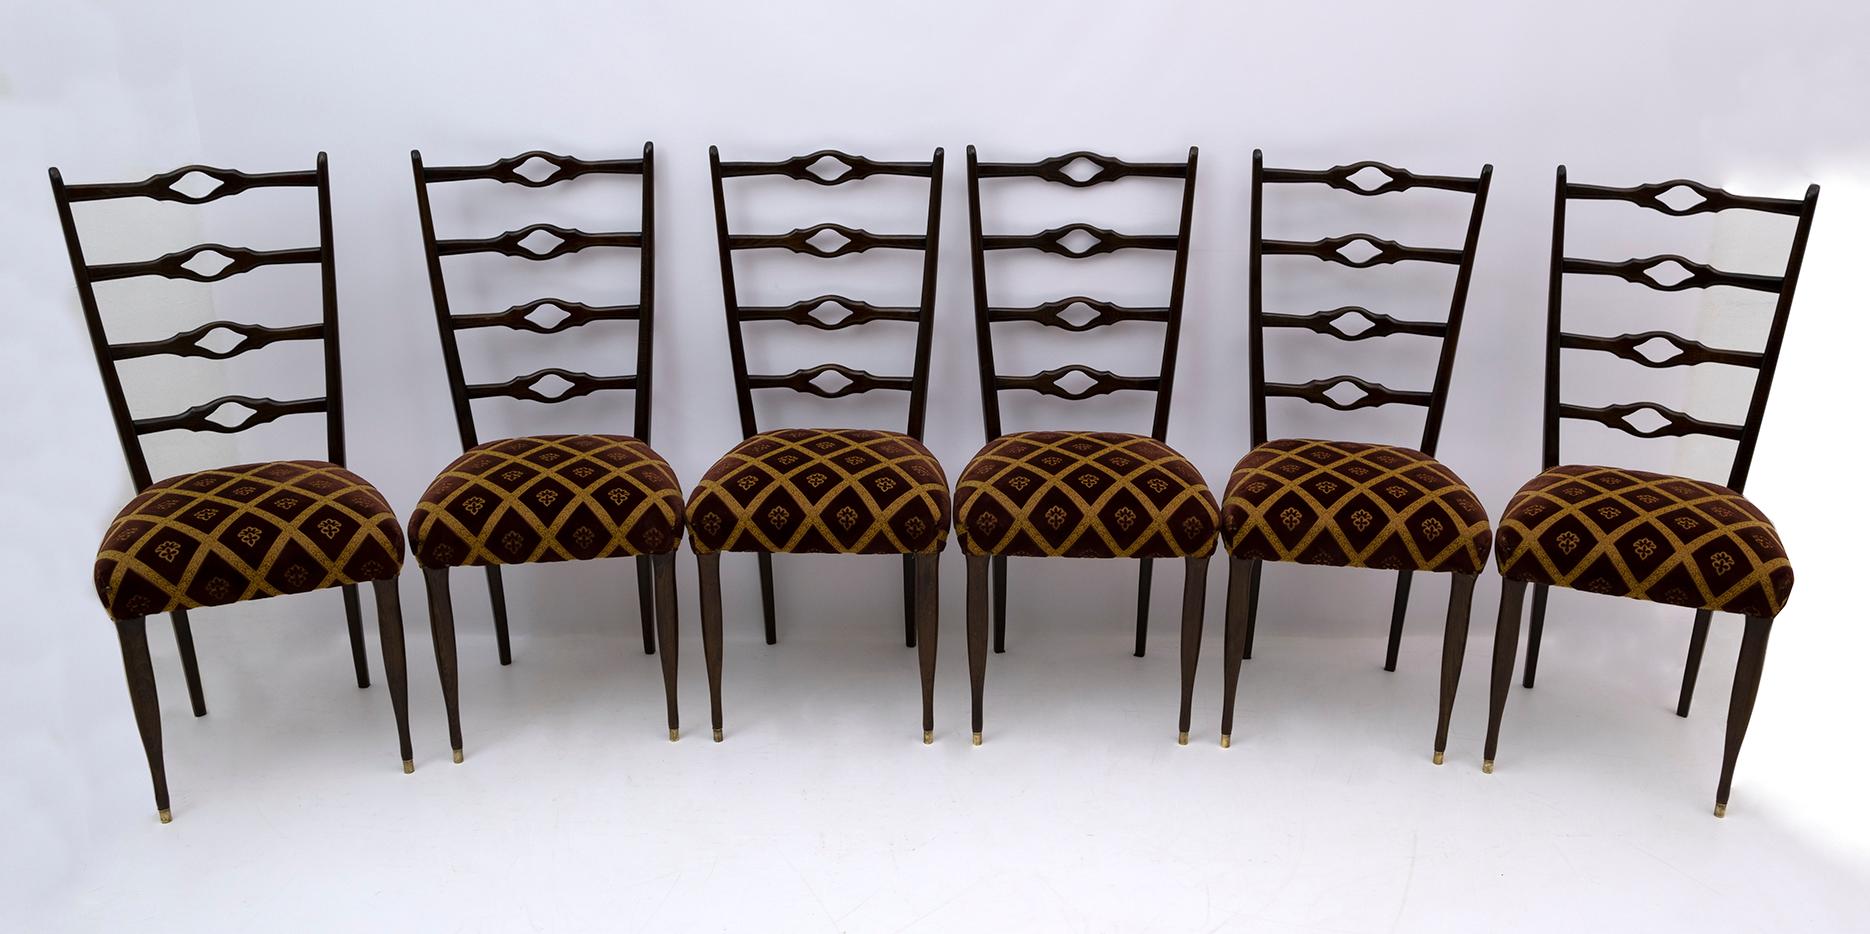 Six dining chairs designed by the famous Italian architect Guglielmo Ulrich, the chairs are in walnut and the upholstery is in textured velvet, the upholstery is original and in good condition, the chairs have been polished with shellac.